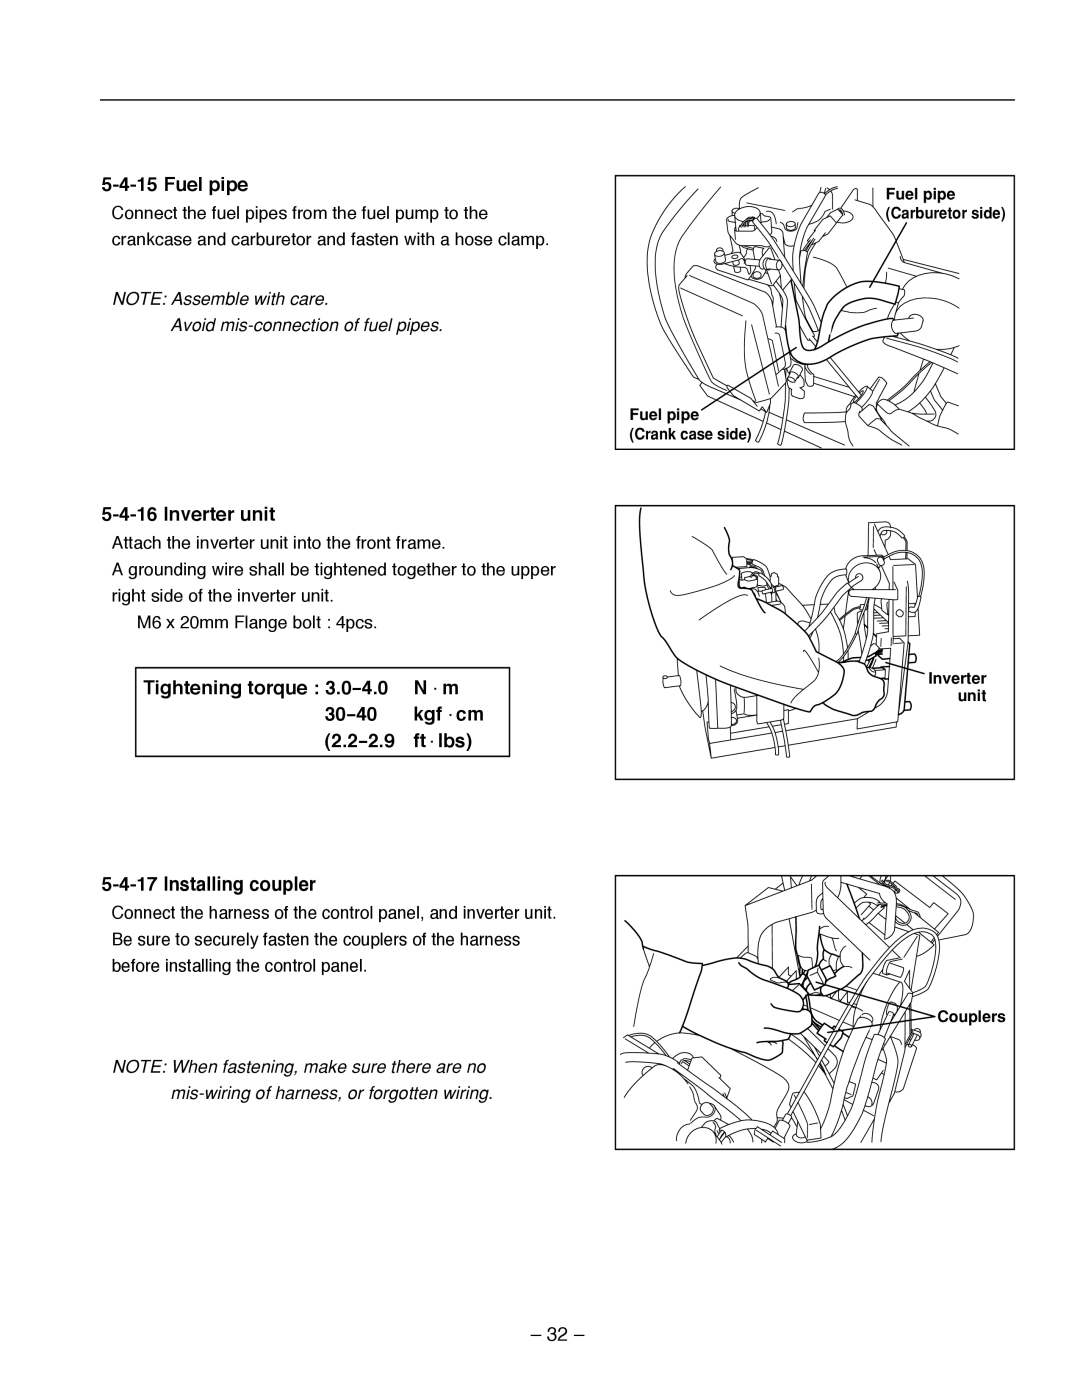 Subaru Robin Power Products R1700i service manual 5-4-15Fuel pipe, 5-4-16Inverter unit, 5-4-17Installing coupler 